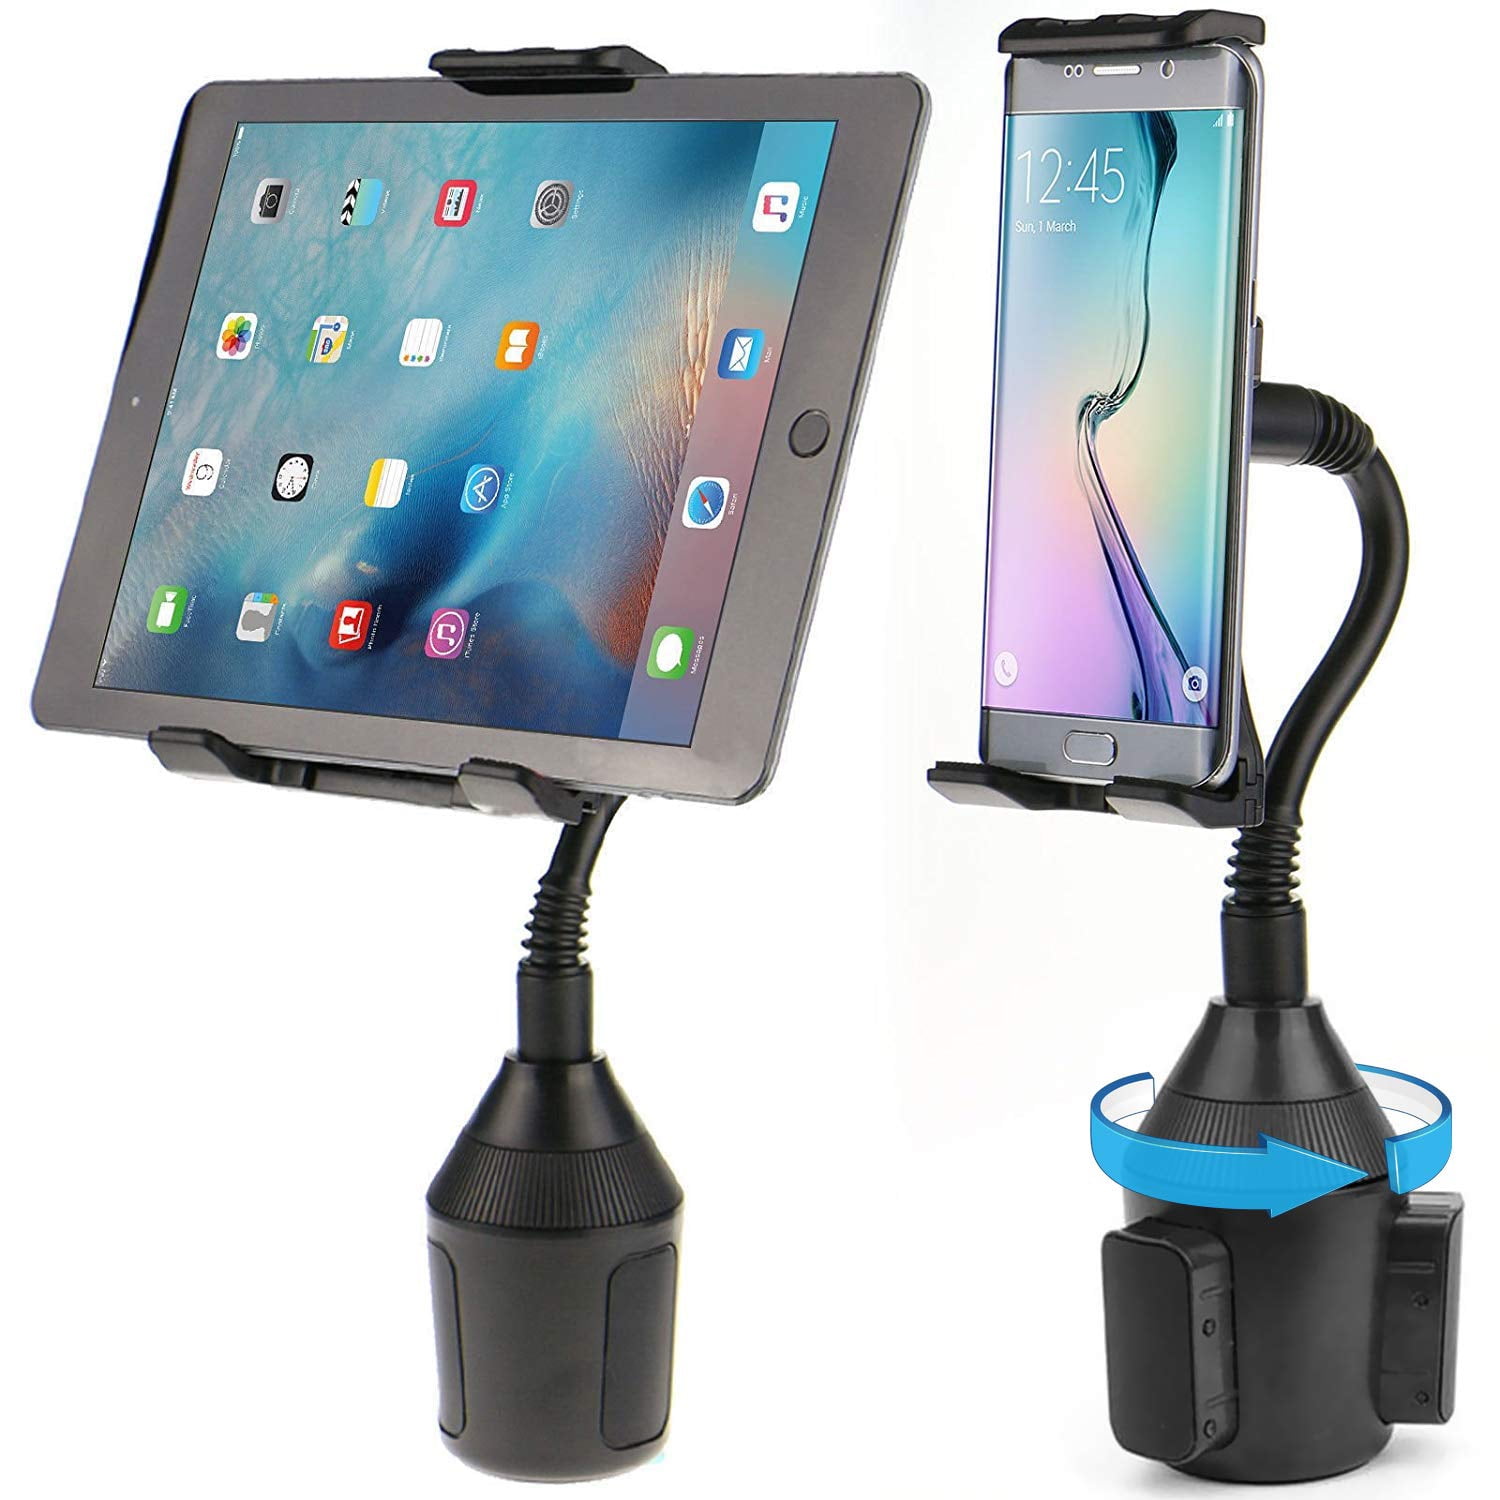 ROBUST ARM Car Cup Holder Mount for Apple iPad Pro 12.9 Air Mini Tablet iPhone X 